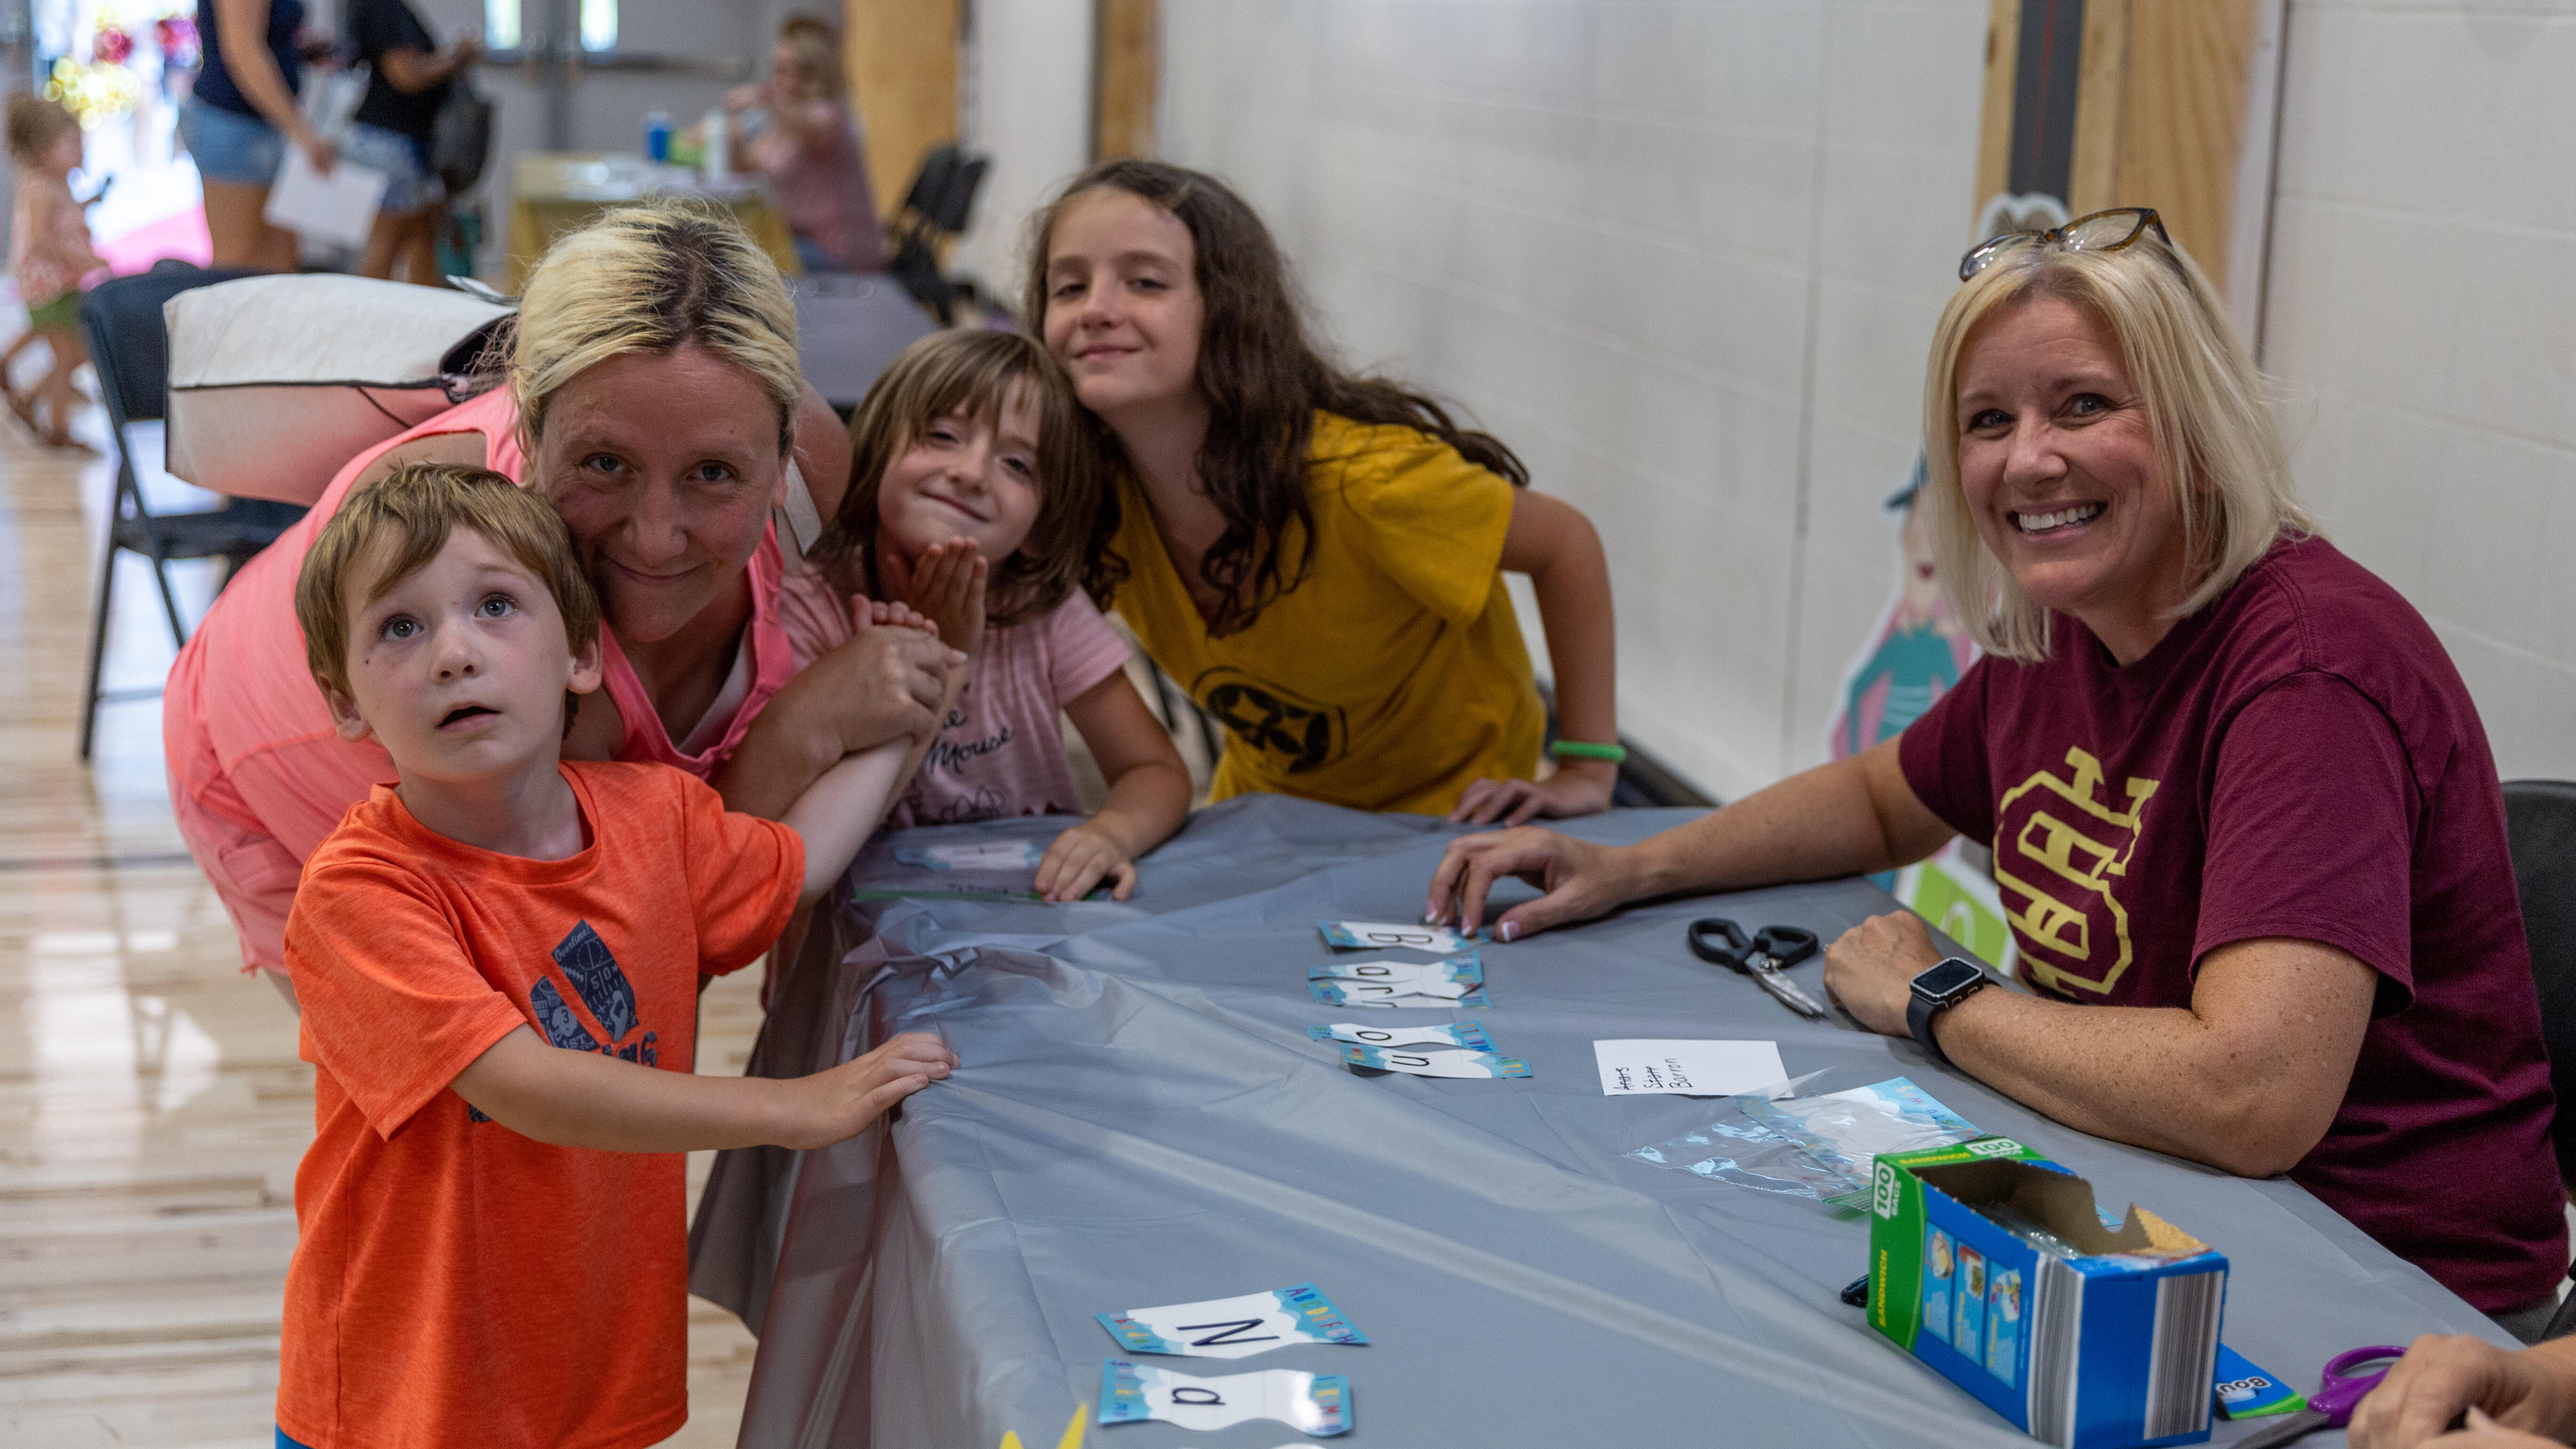 Steel Valley teachers interact with new students families at the kindergarten registration and orientation event